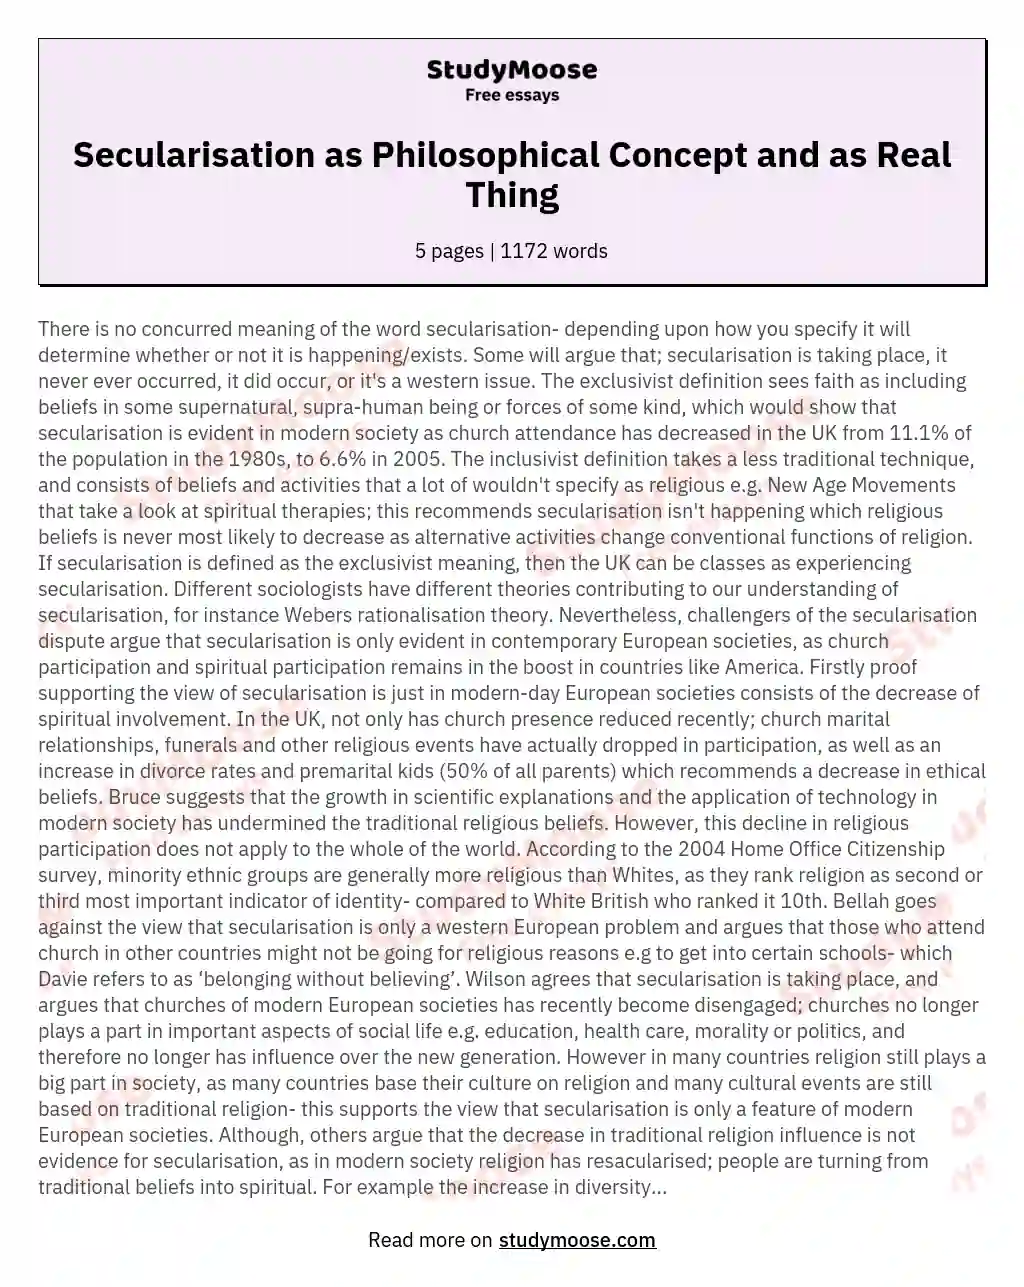 Secularisation as Philosophical Concept and as Real Thing